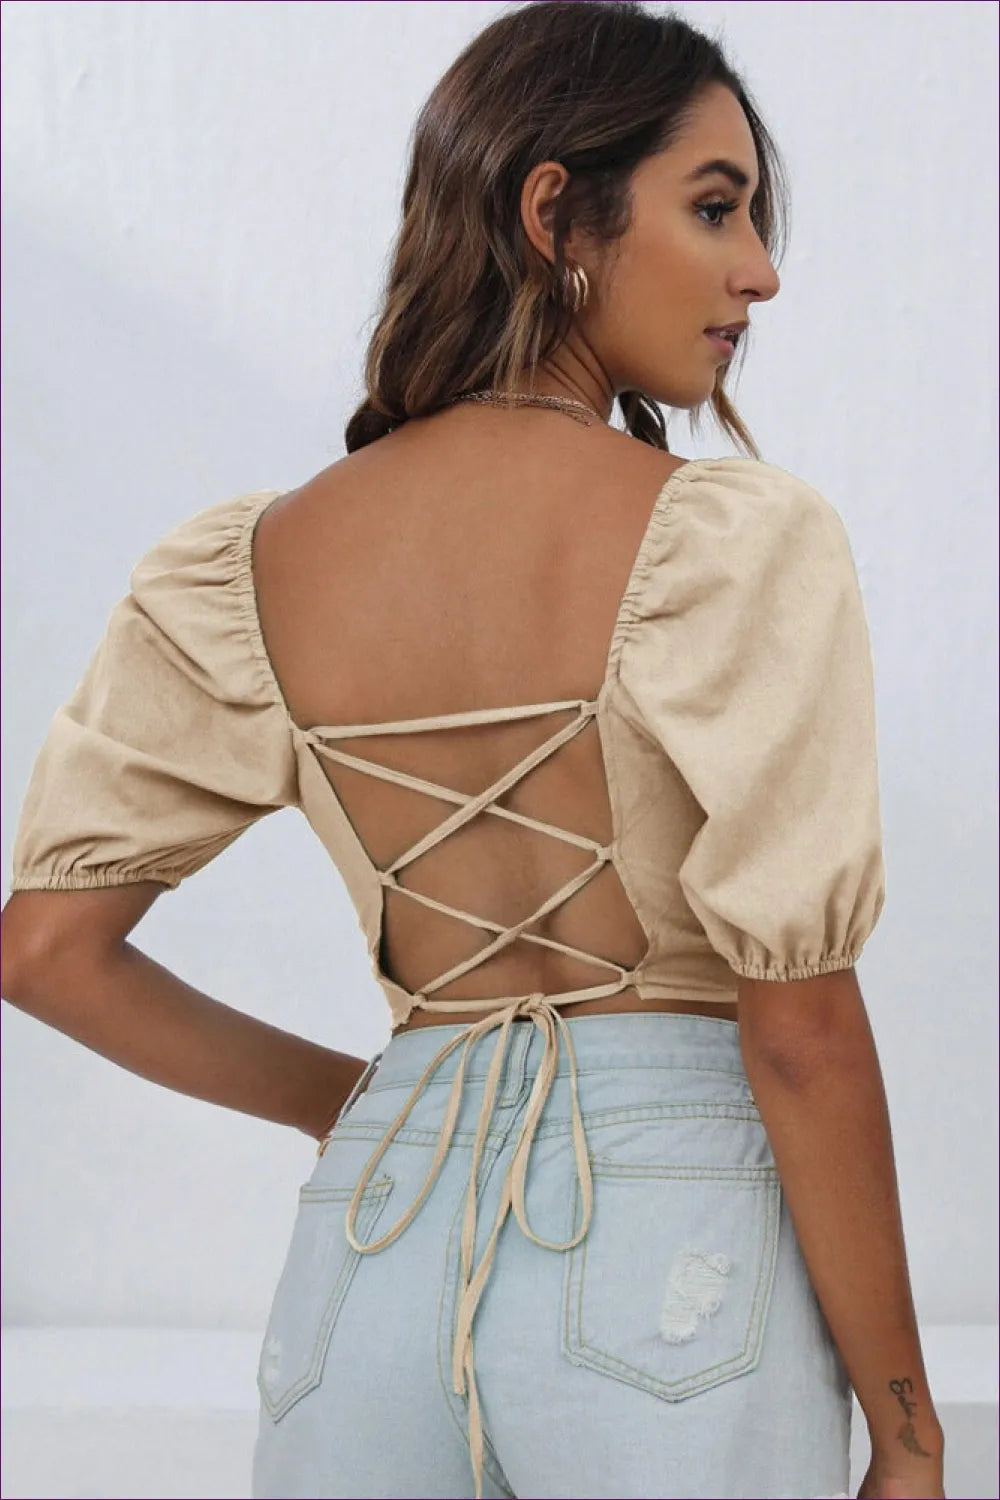 Make a Statement With Our Backless Lace Up Short Sleeve Top. Lightweight And Comfortable, It Features